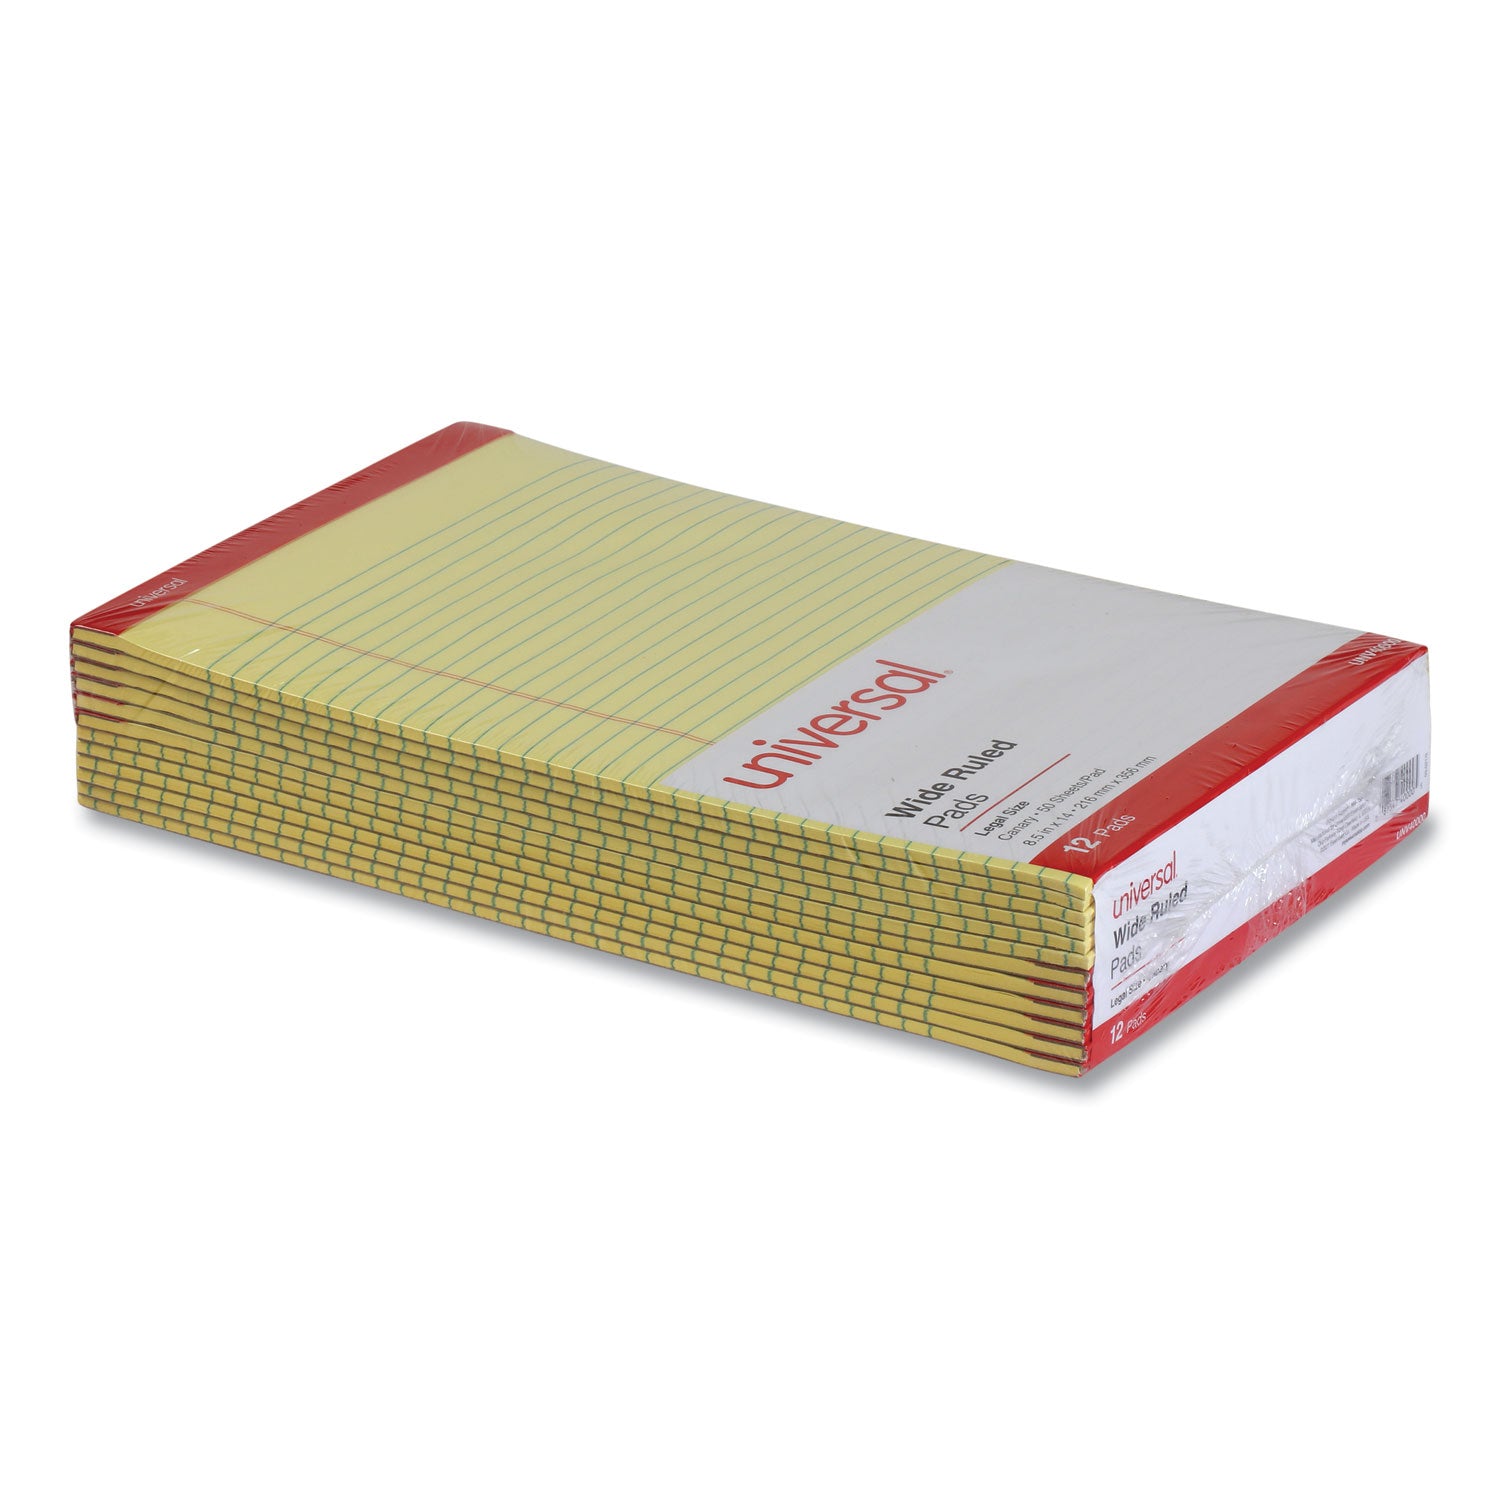 Perforated Ruled Writing Pads, Wide/Legal Rule, Red Headband, 50 Canary-Yellow 8.5 x 14 Sheets, Dozen - 